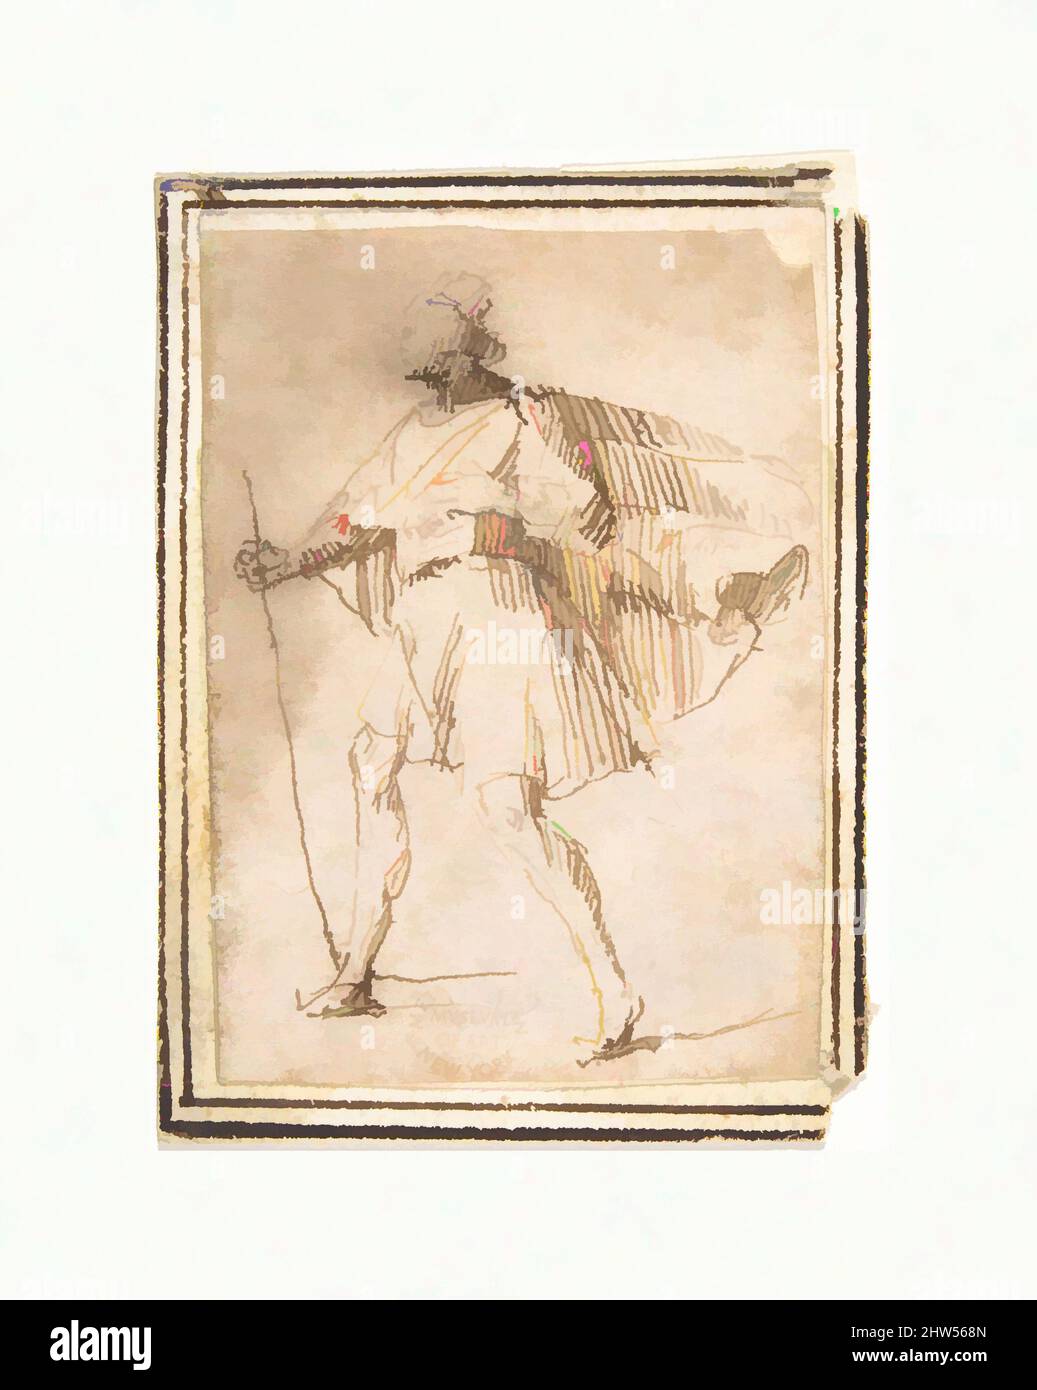 Art inspired by Standing Male Figure with Cloak and Staff, 1624–63, Pen and brown ink. Framing lines in pen and brown ink on mount, 3-1/16 x 2-1/4 in. (7.8 x 5.7 cm), Drawings, Francesco Allegrini (Italian, Cantiano (?) 1615/20–after 1679 Gubbio, Classic works modernized by Artotop with a splash of modernity. Shapes, color and value, eye-catching visual impact on art. Emotions through freedom of artworks in a contemporary way. A timeless message pursuing a wildly creative new direction. Artists turning to the digital medium and creating the Artotop NFT Stock Photo